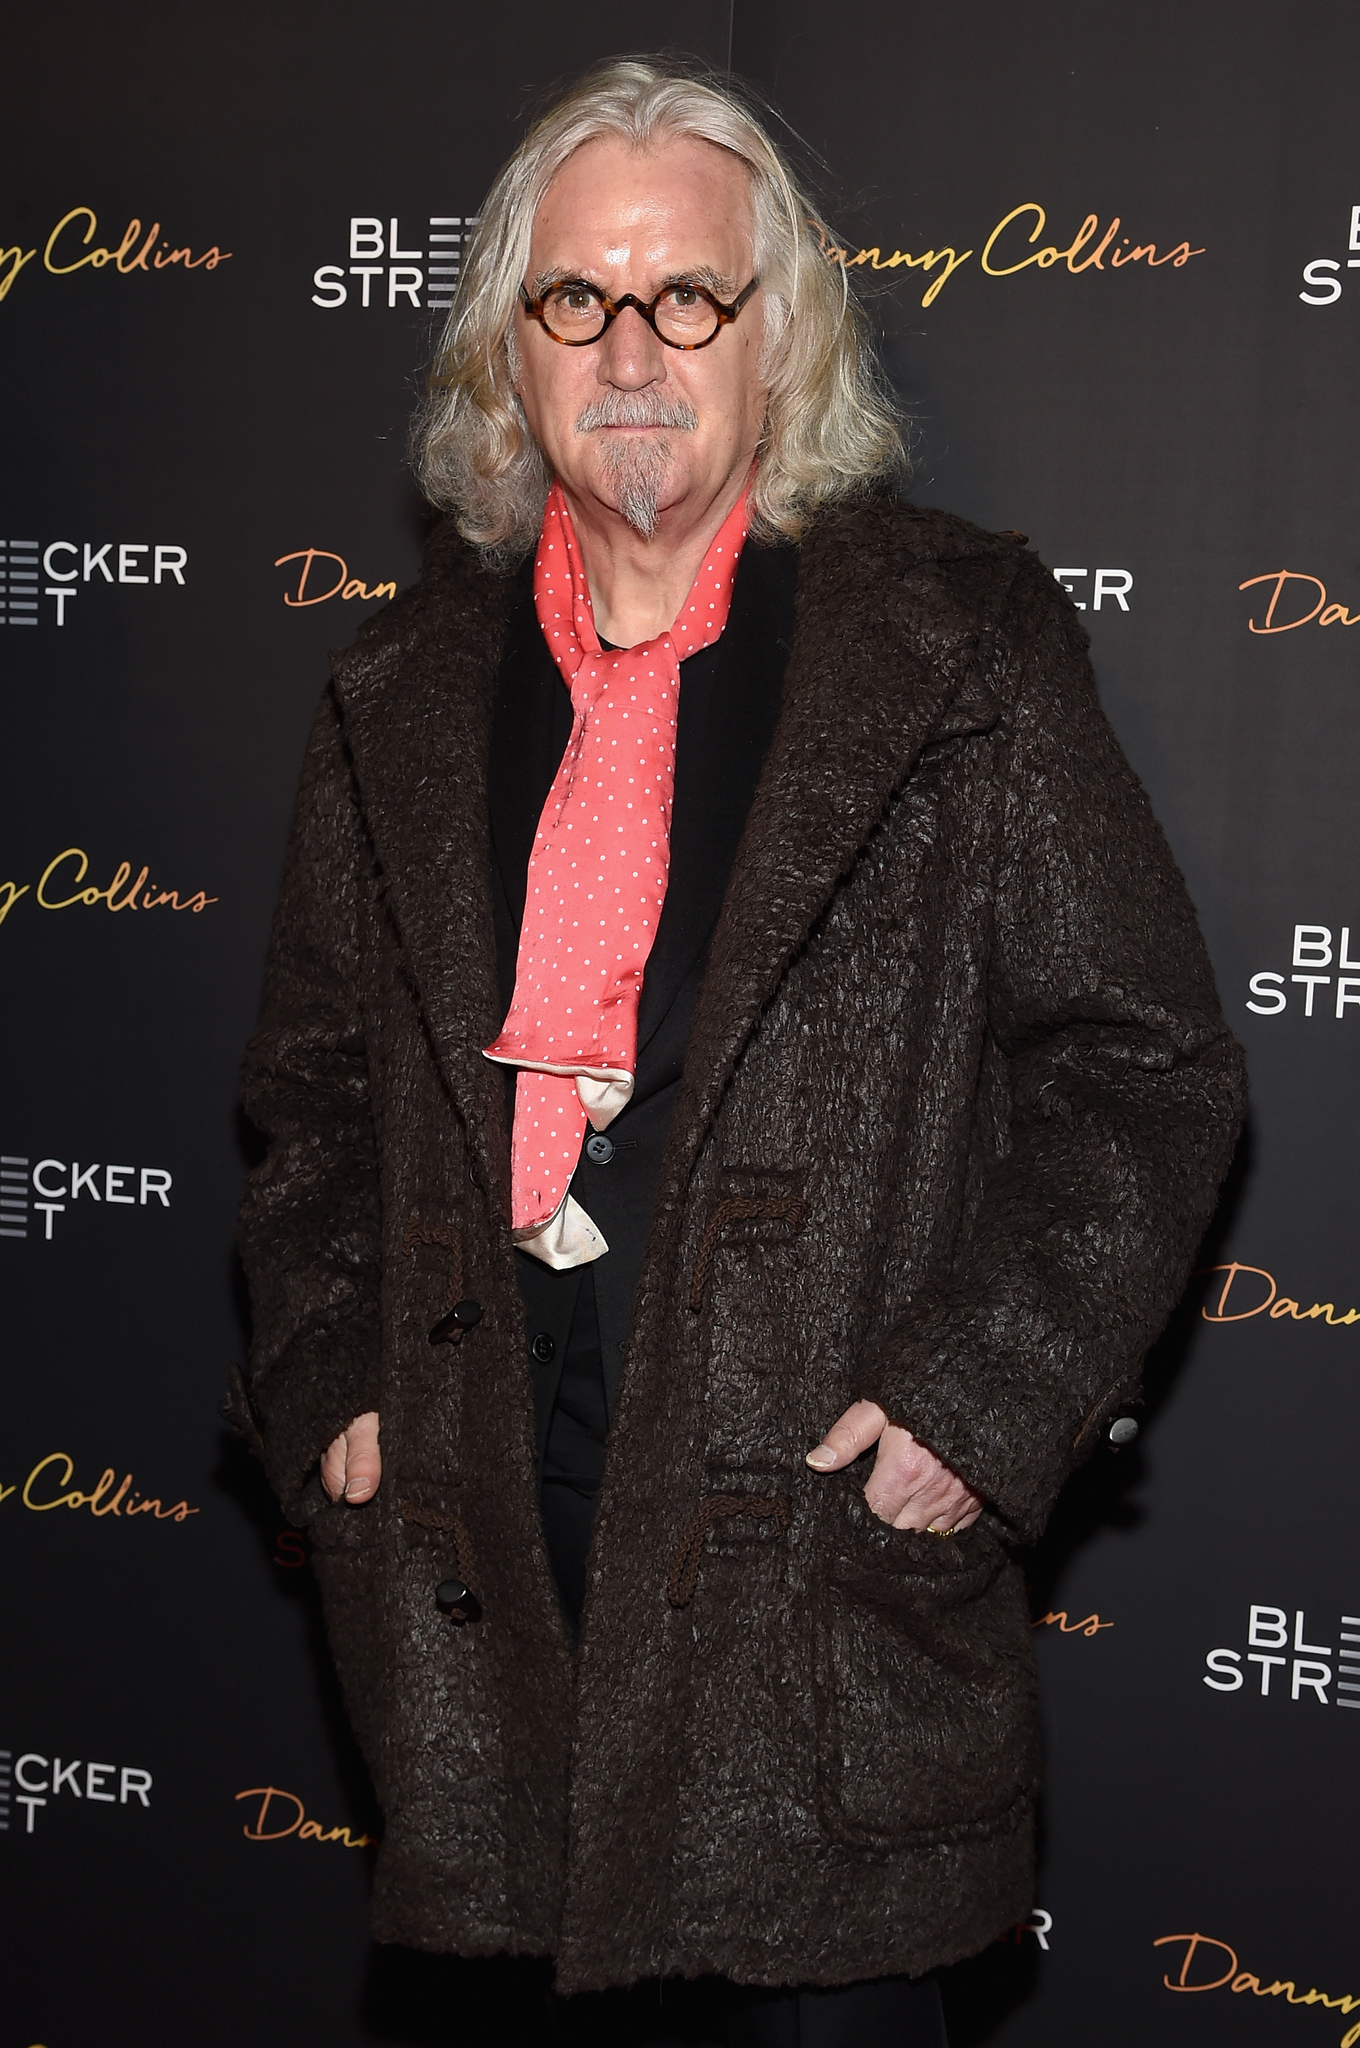 Billy Connolly at event of Denis Kolinsas (2015)